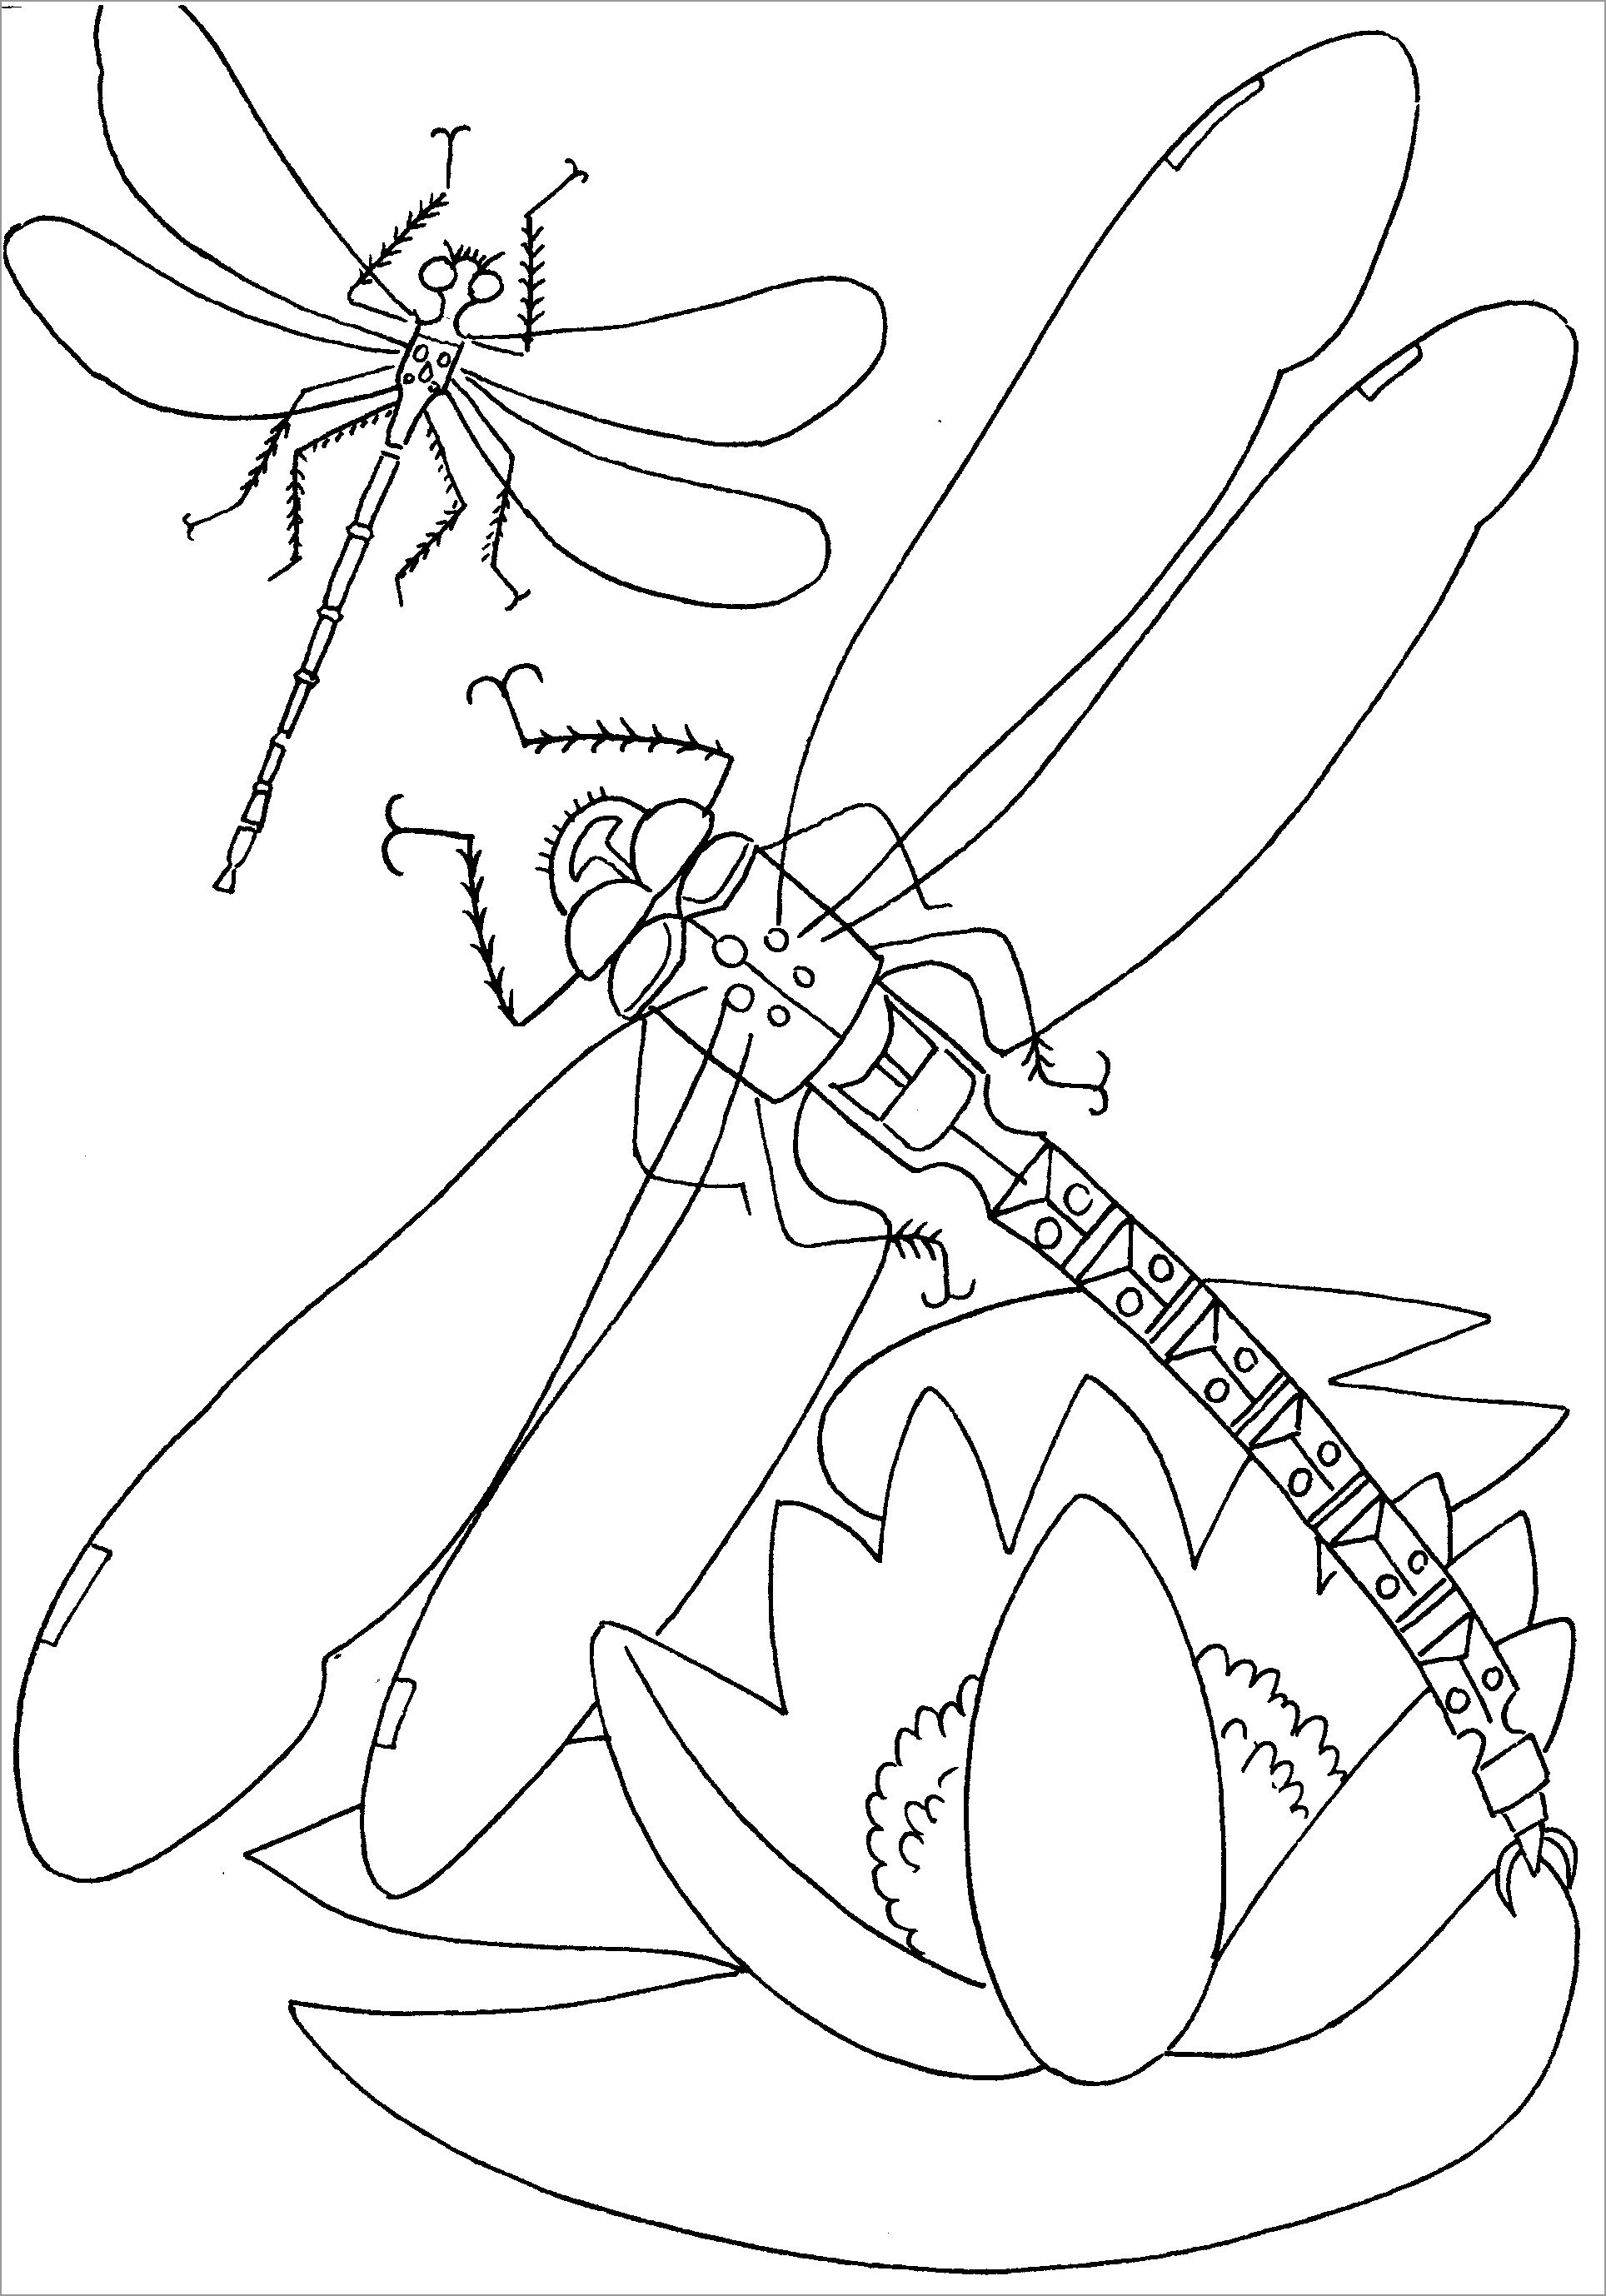 Dragonfly Insect Coloring Page